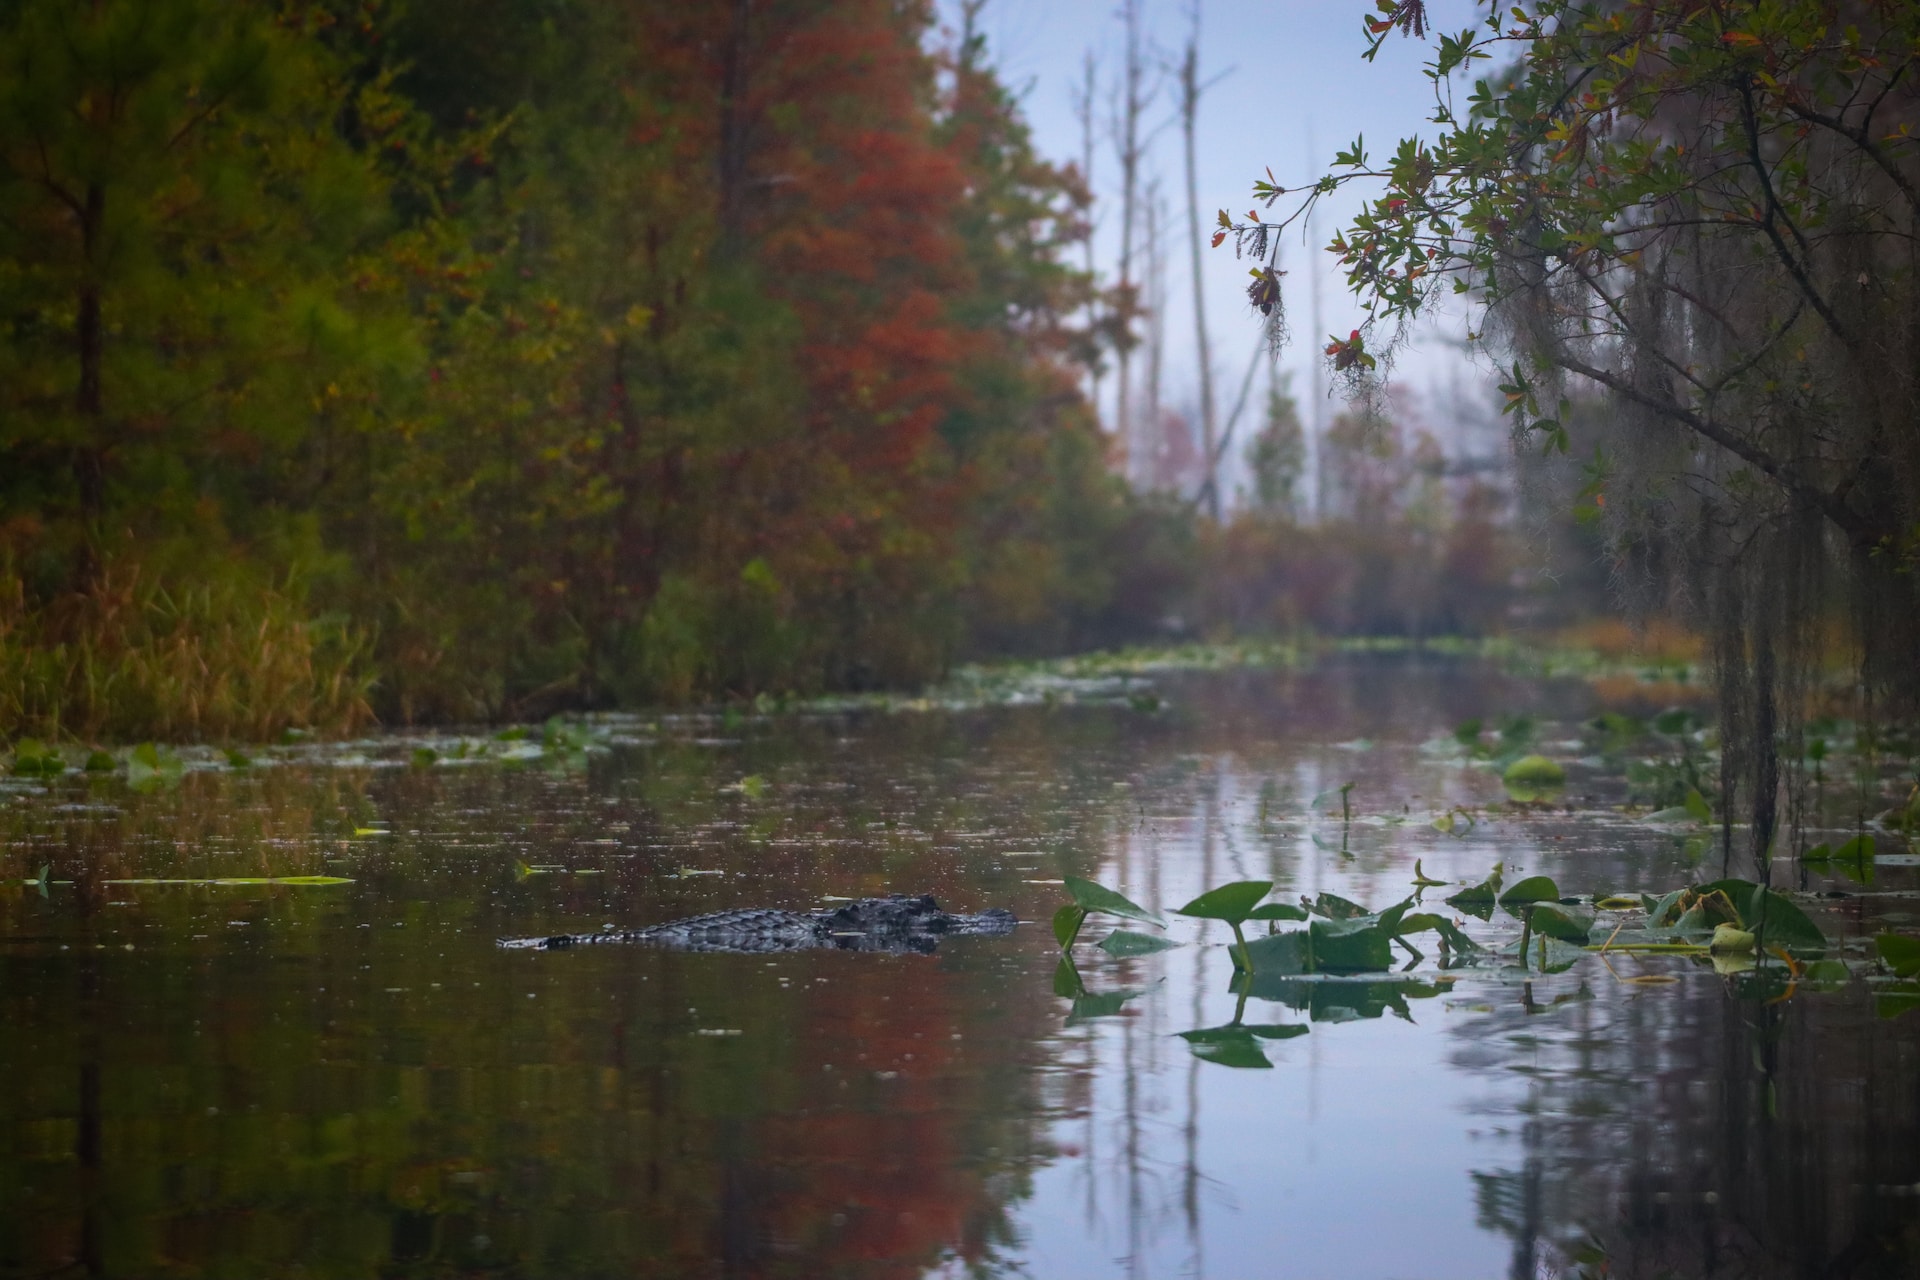 Okefenokee Swamp during the day.